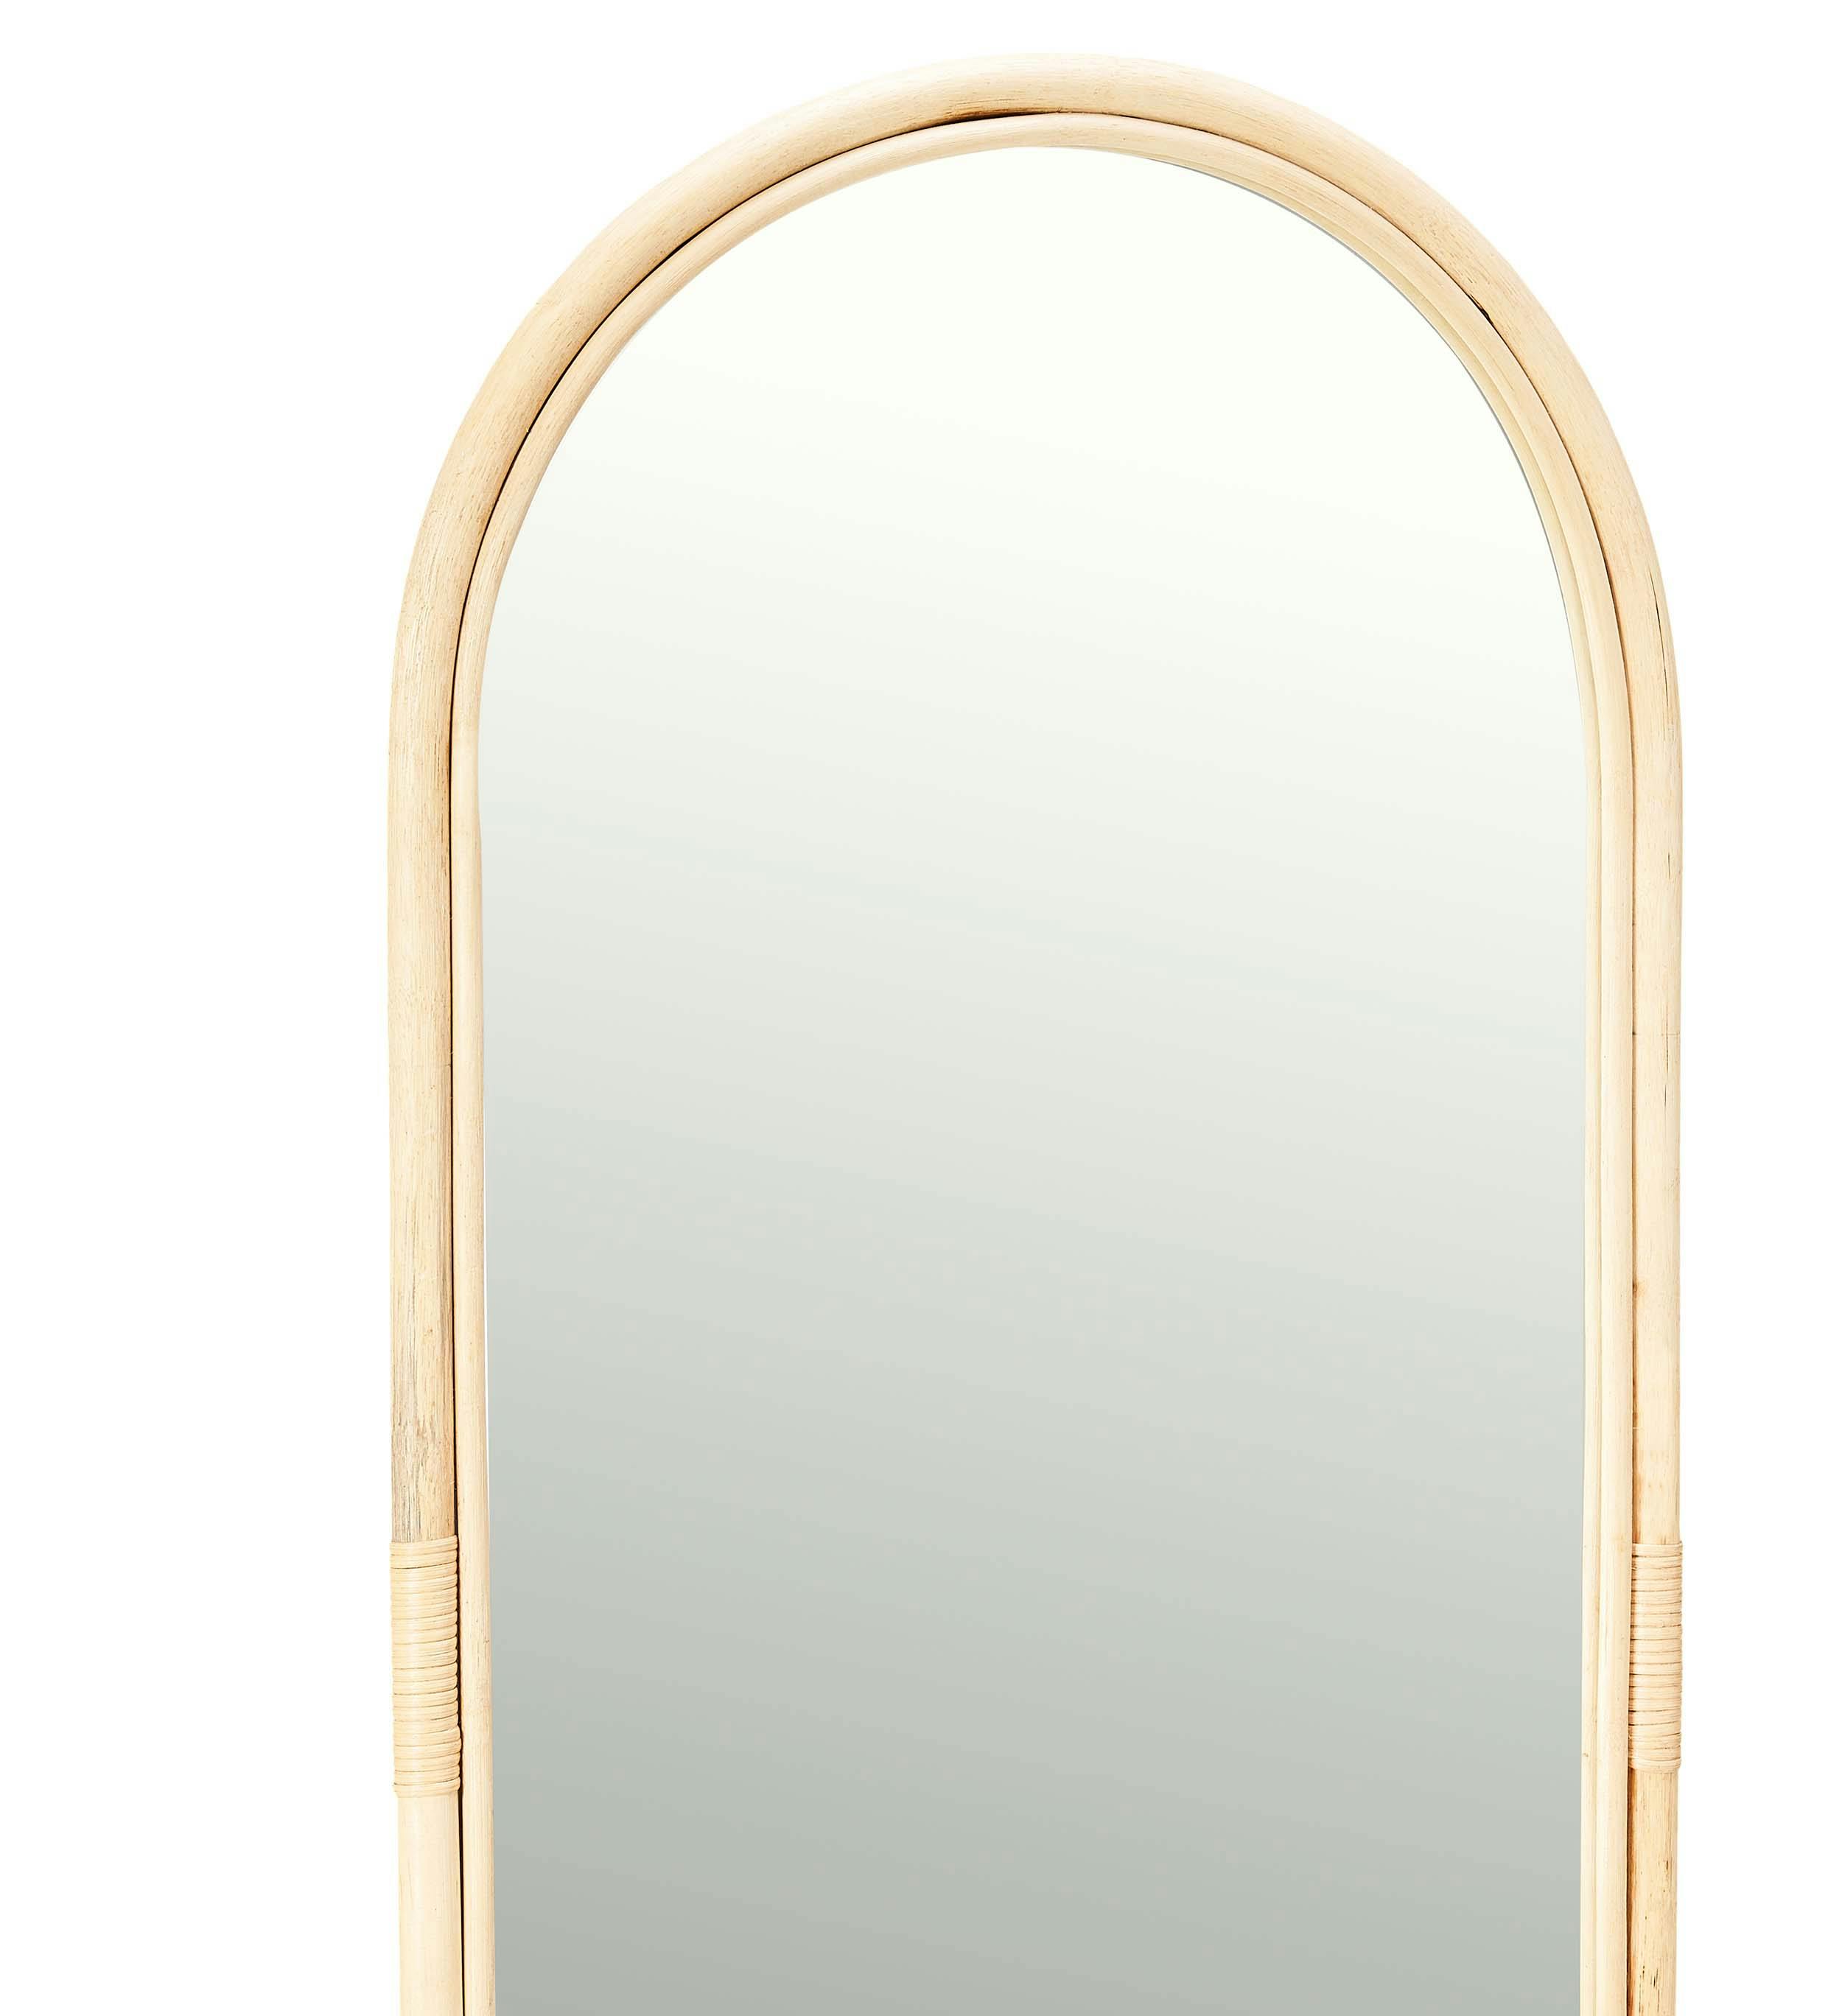 Bamboo Arched Mirror 2